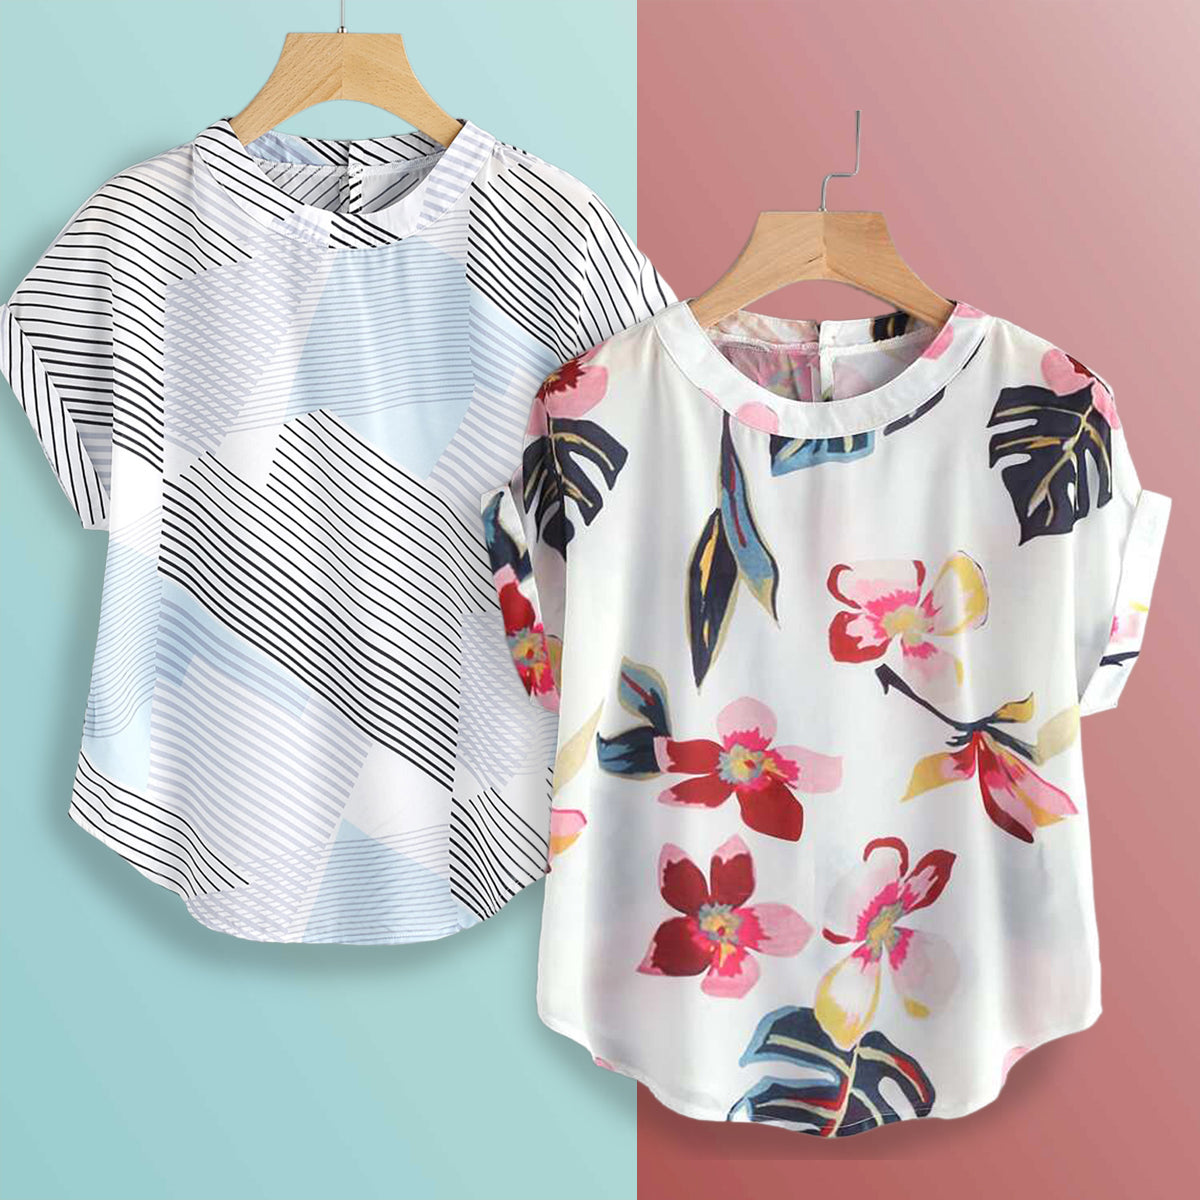 Stylish Turquoise Lines & White Floral Tops Combo For Women & Girls(Pack Of 2 Pcs)